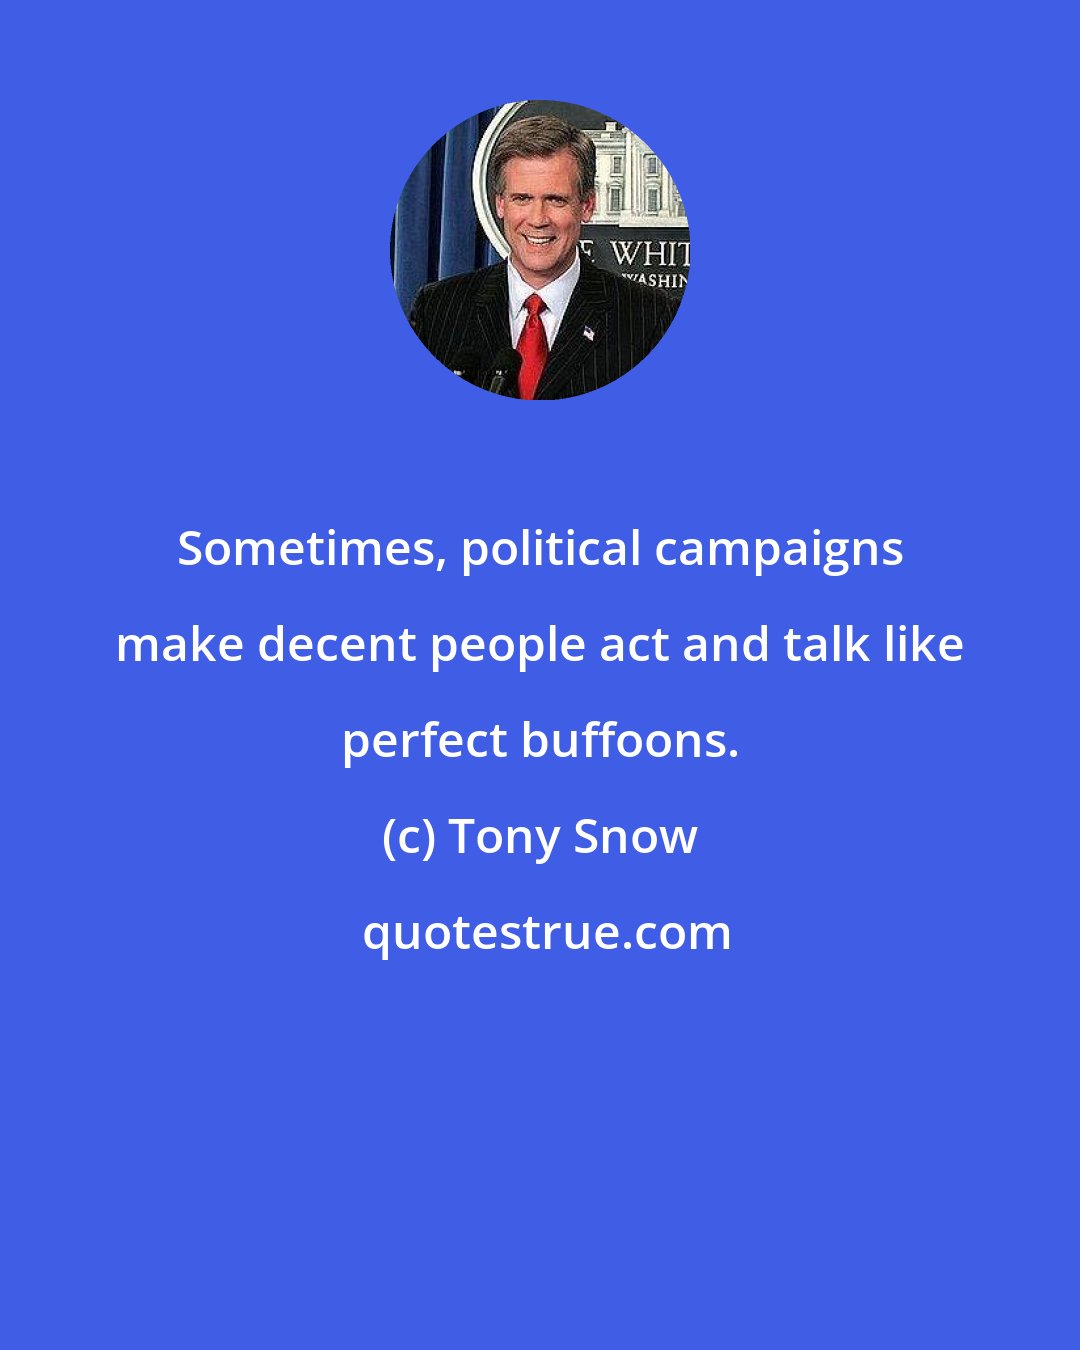 Tony Snow: Sometimes, political campaigns make decent people act and talk like perfect buffoons.